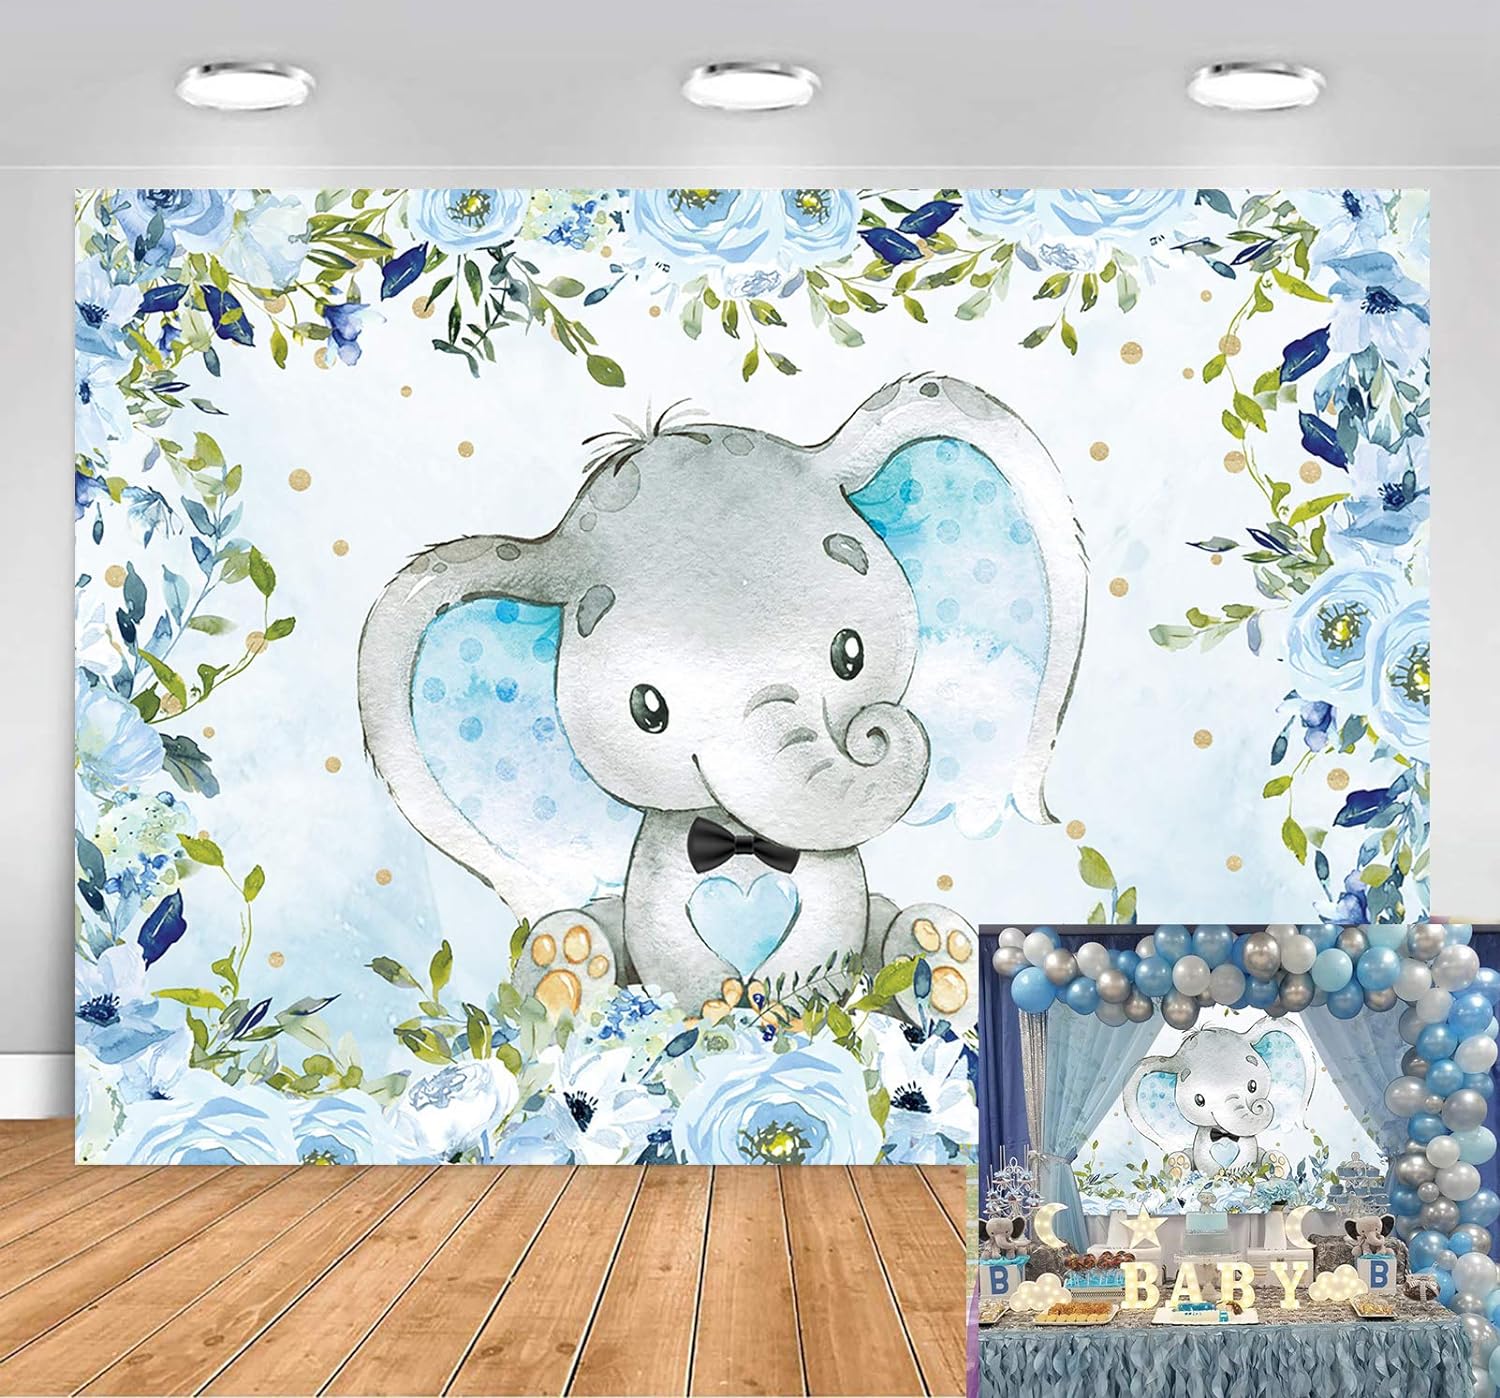 baby Shower baby boy Elephant theme baby shower party sign baby shower It's a boy Baby Elephant Party Sign baby Shower